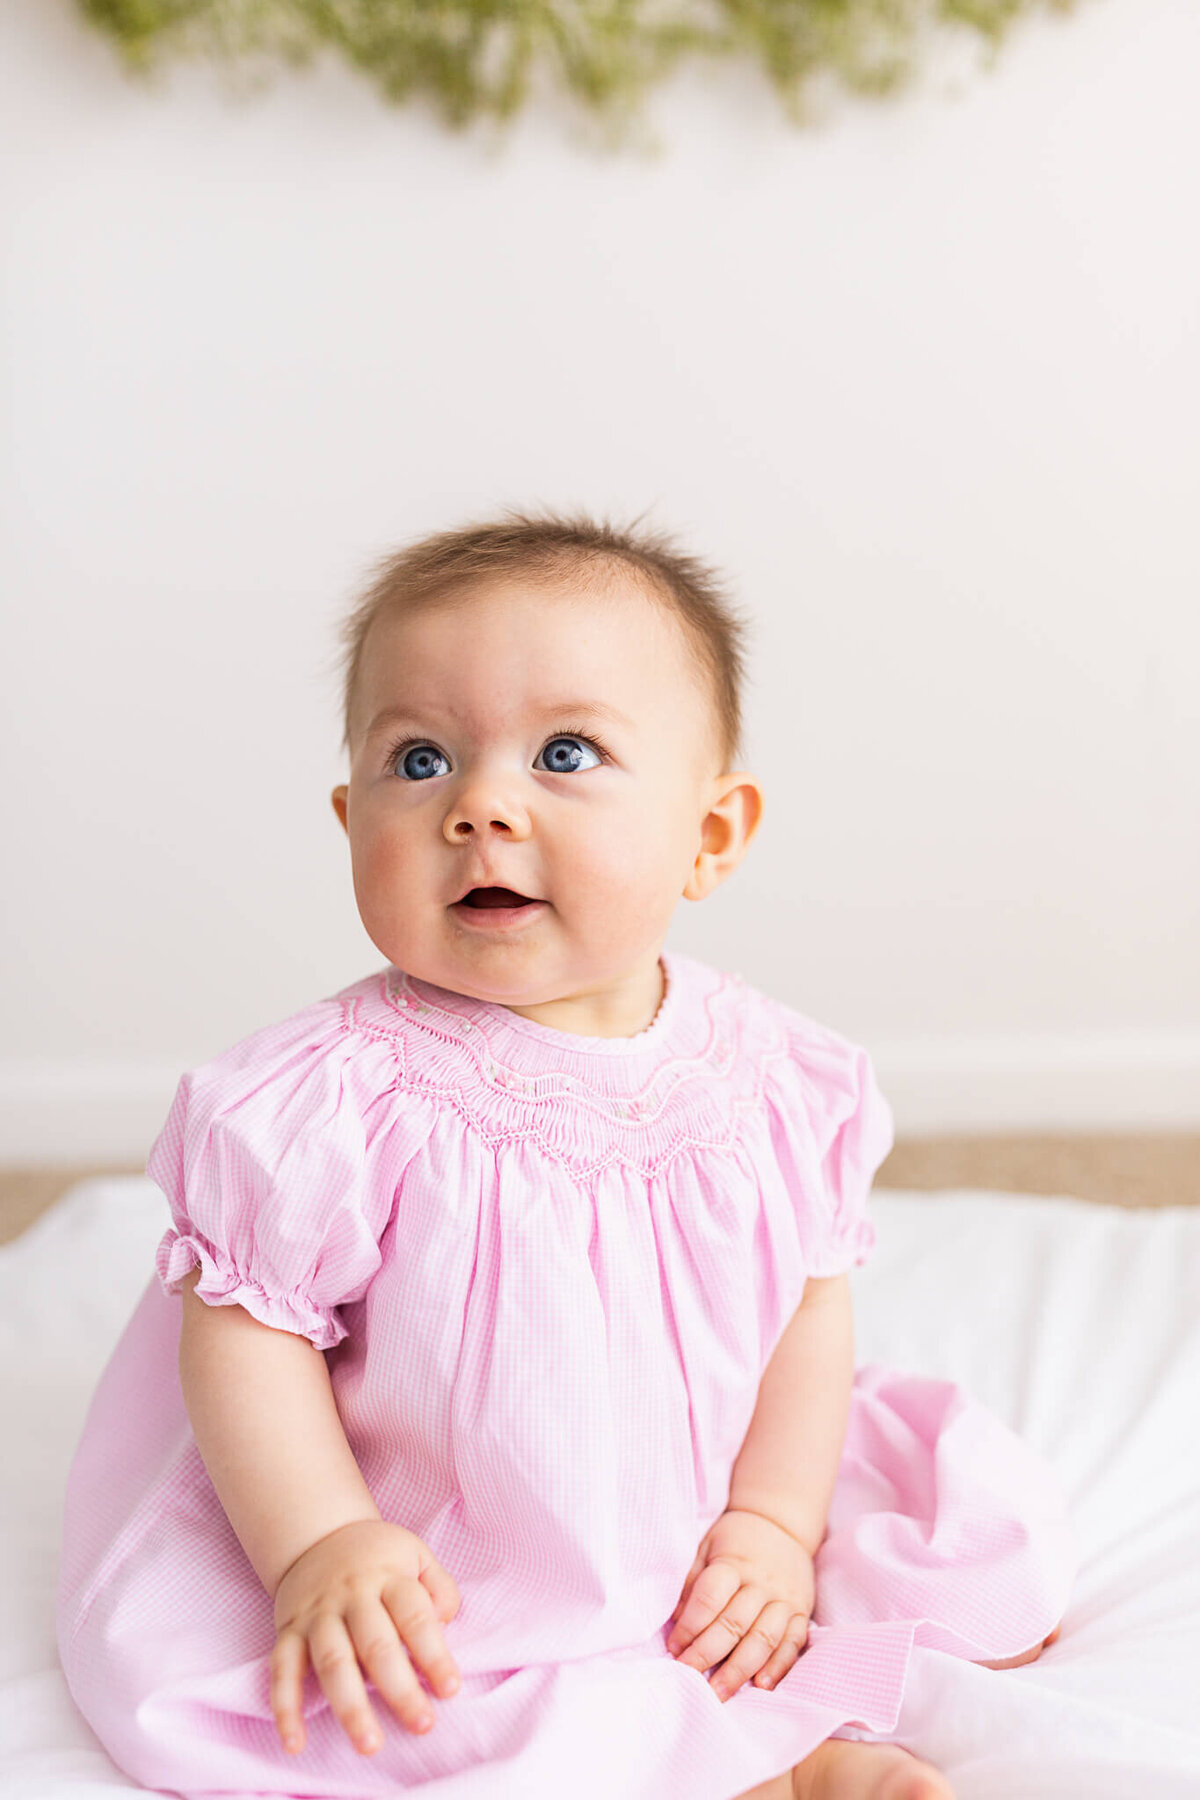 Six month old in a pink dress sitting in a studio